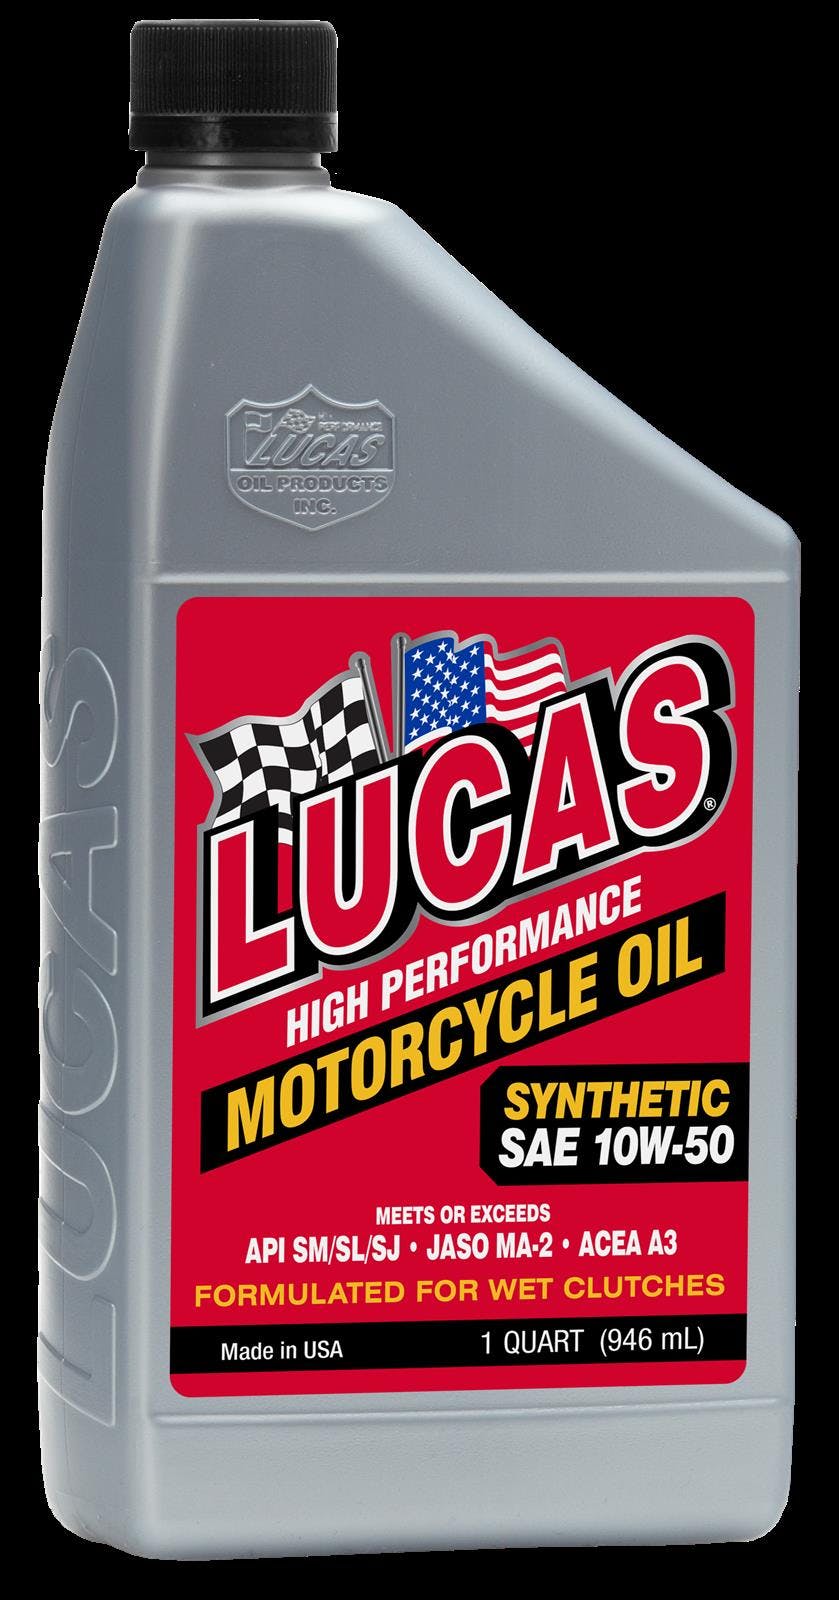 Lucas OIL Synthetic SAE 10W-50 Motorcycle Oil 10753